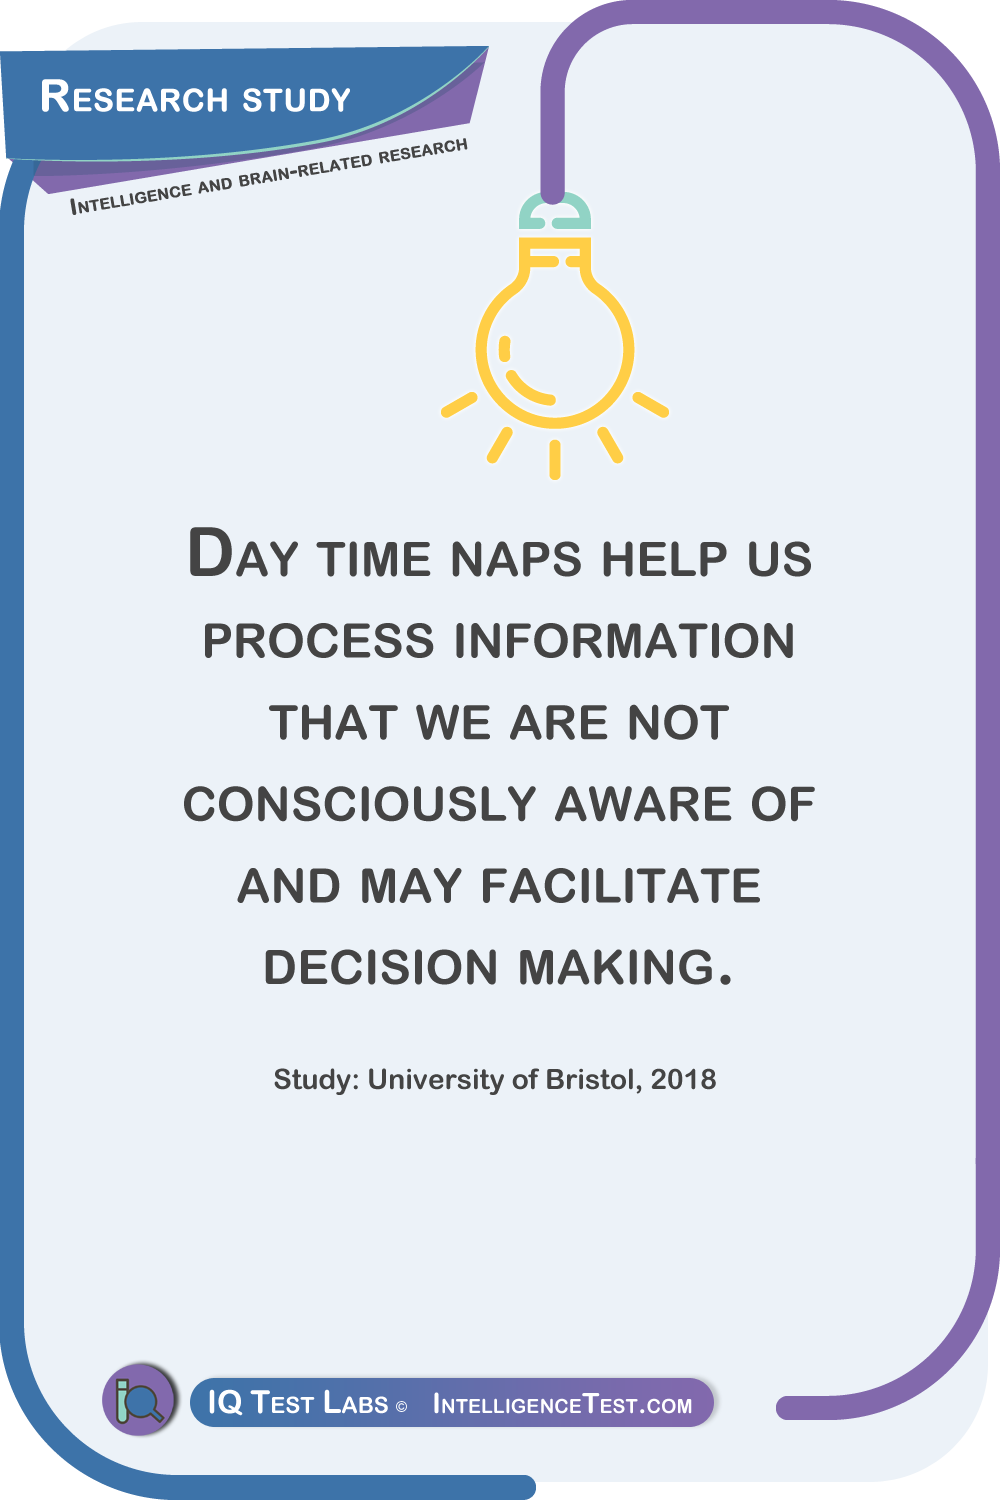 Day time naps help us process information that we are not consciously aware of and may facilitate decision making. Study: University of Bristol, 2018